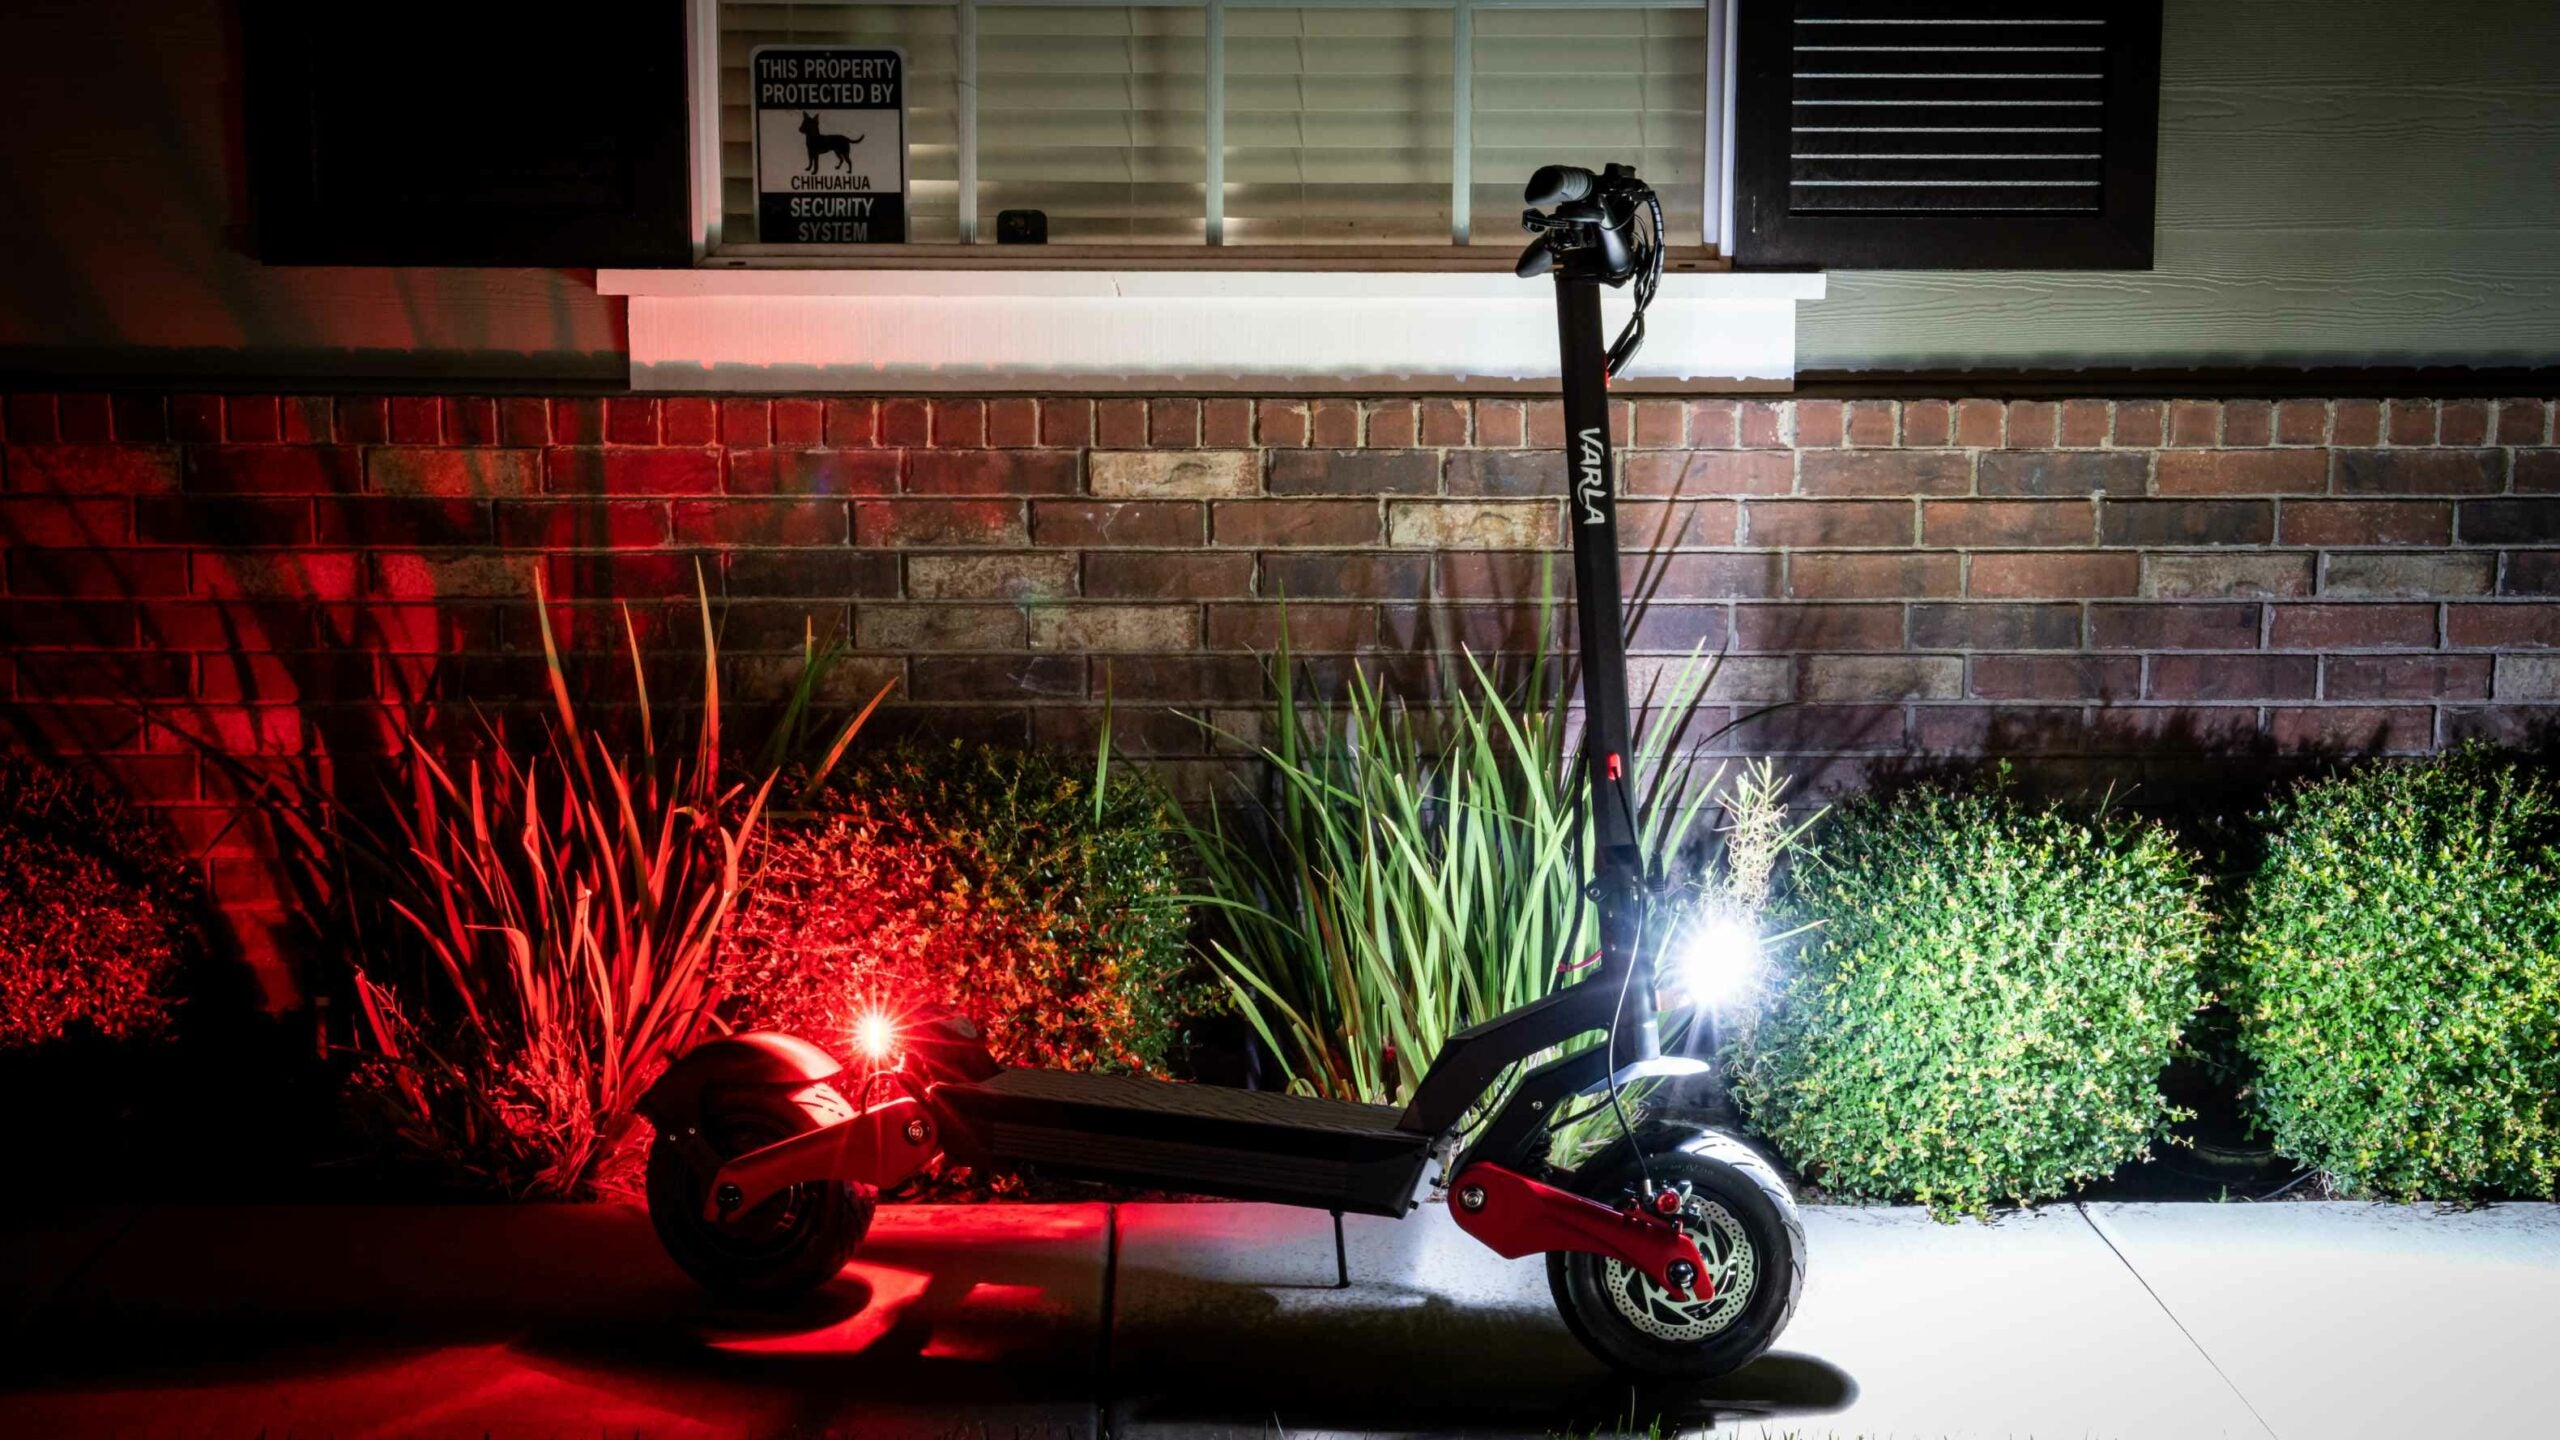 Best Scooter Lights - Handlebar Lights for Electric Scooters